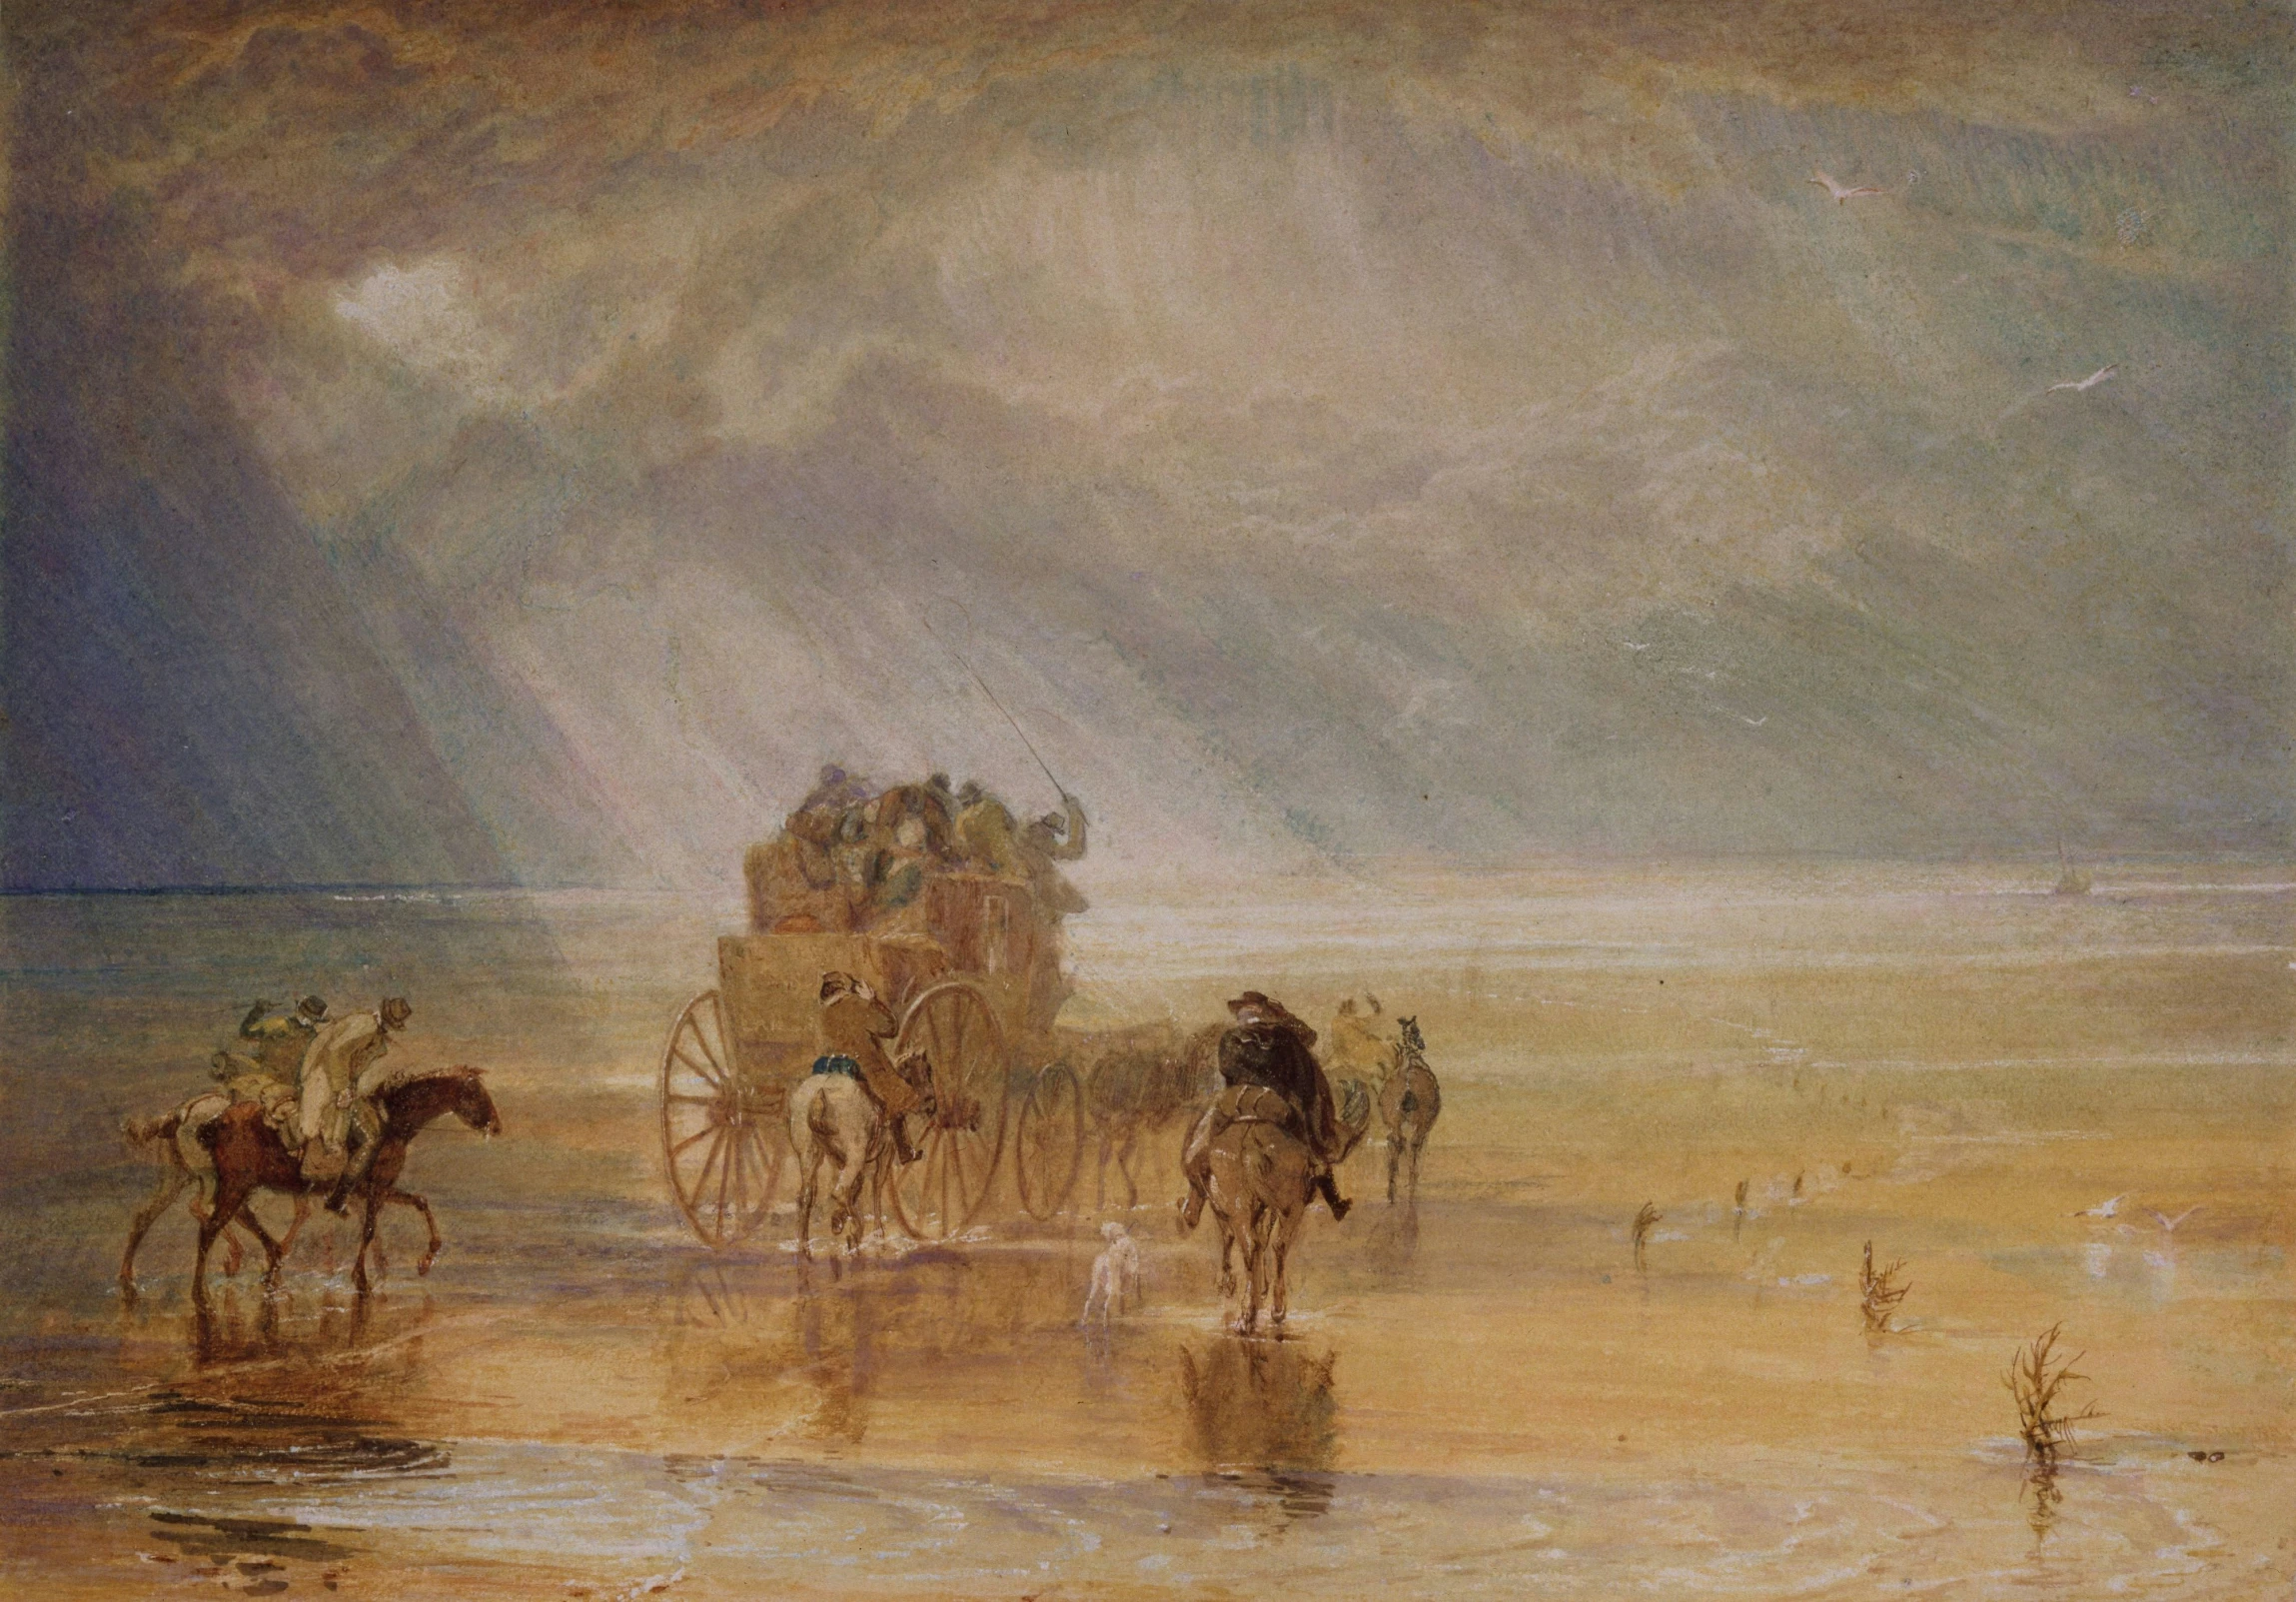 an old painting shows people riding on a wagon pulled by a horse